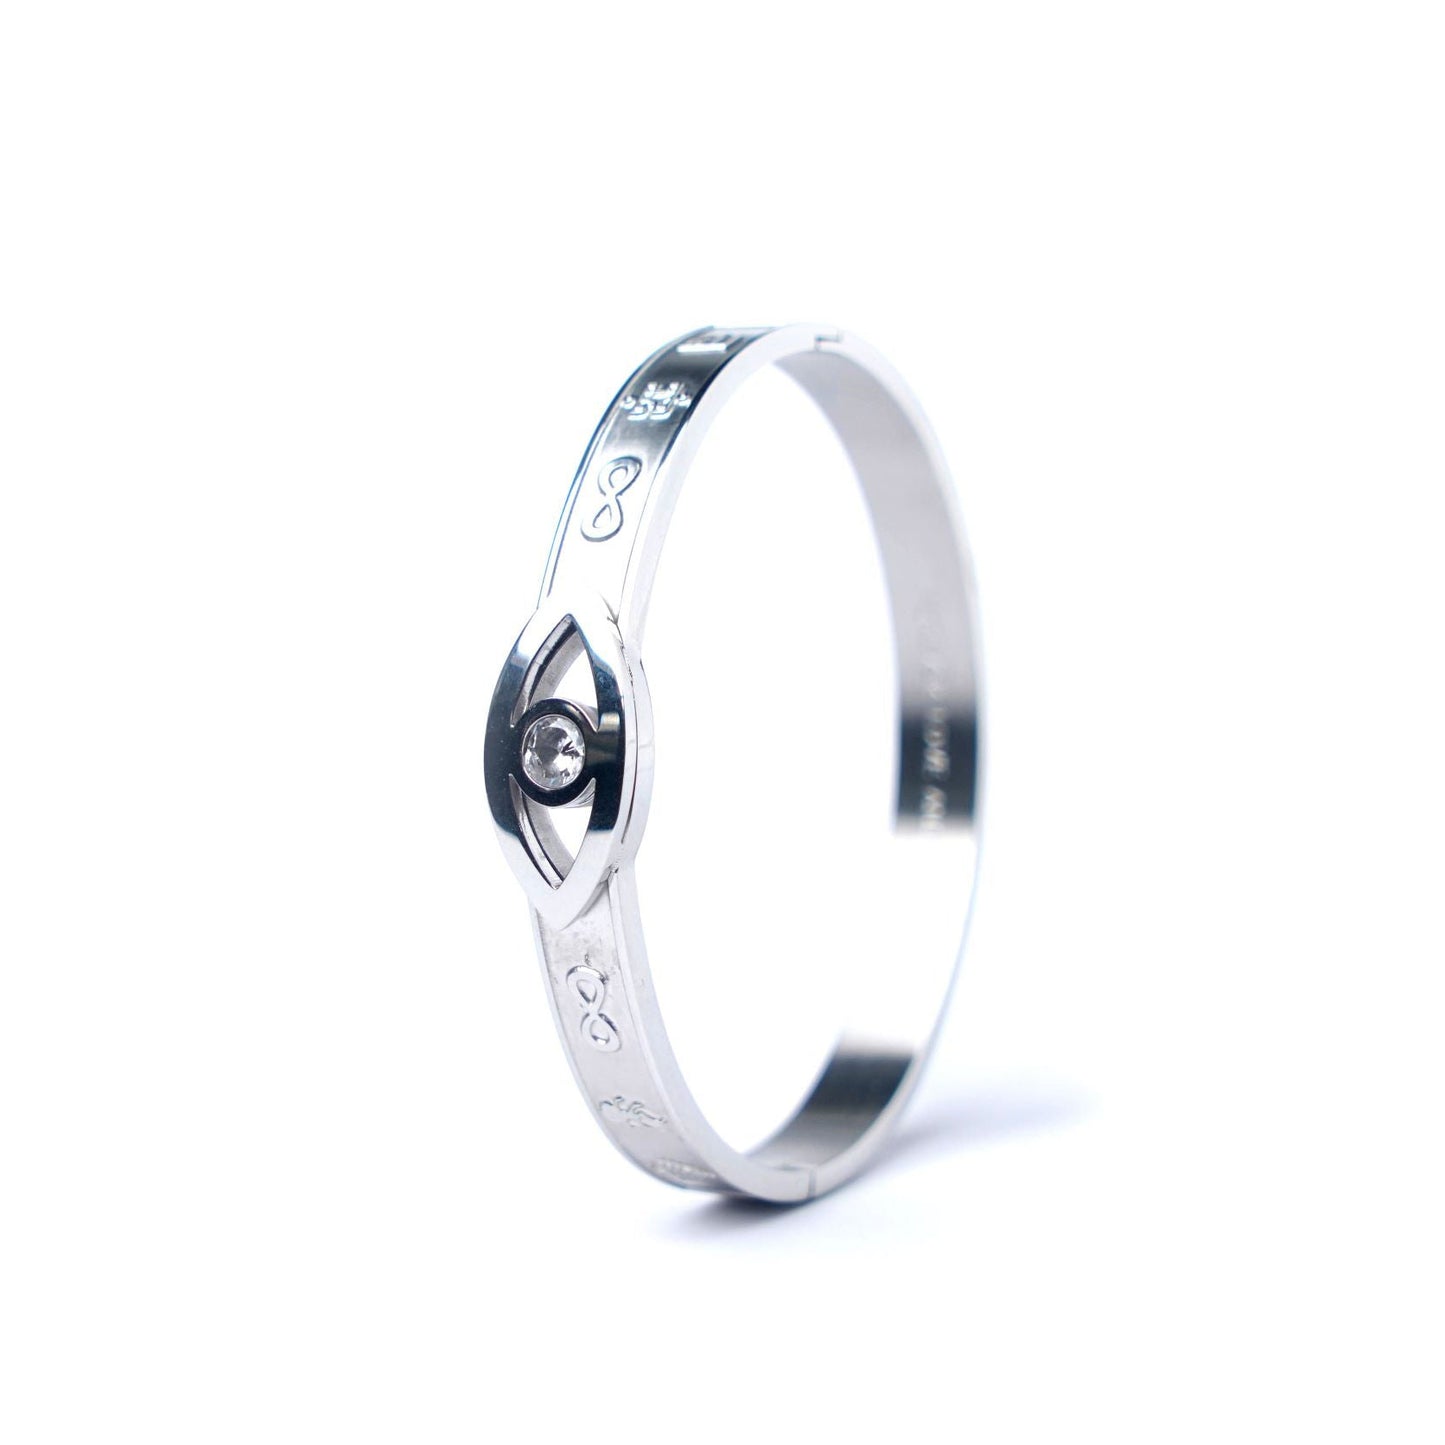 Evil Eye Bangle with Ultimate Mantra Protection